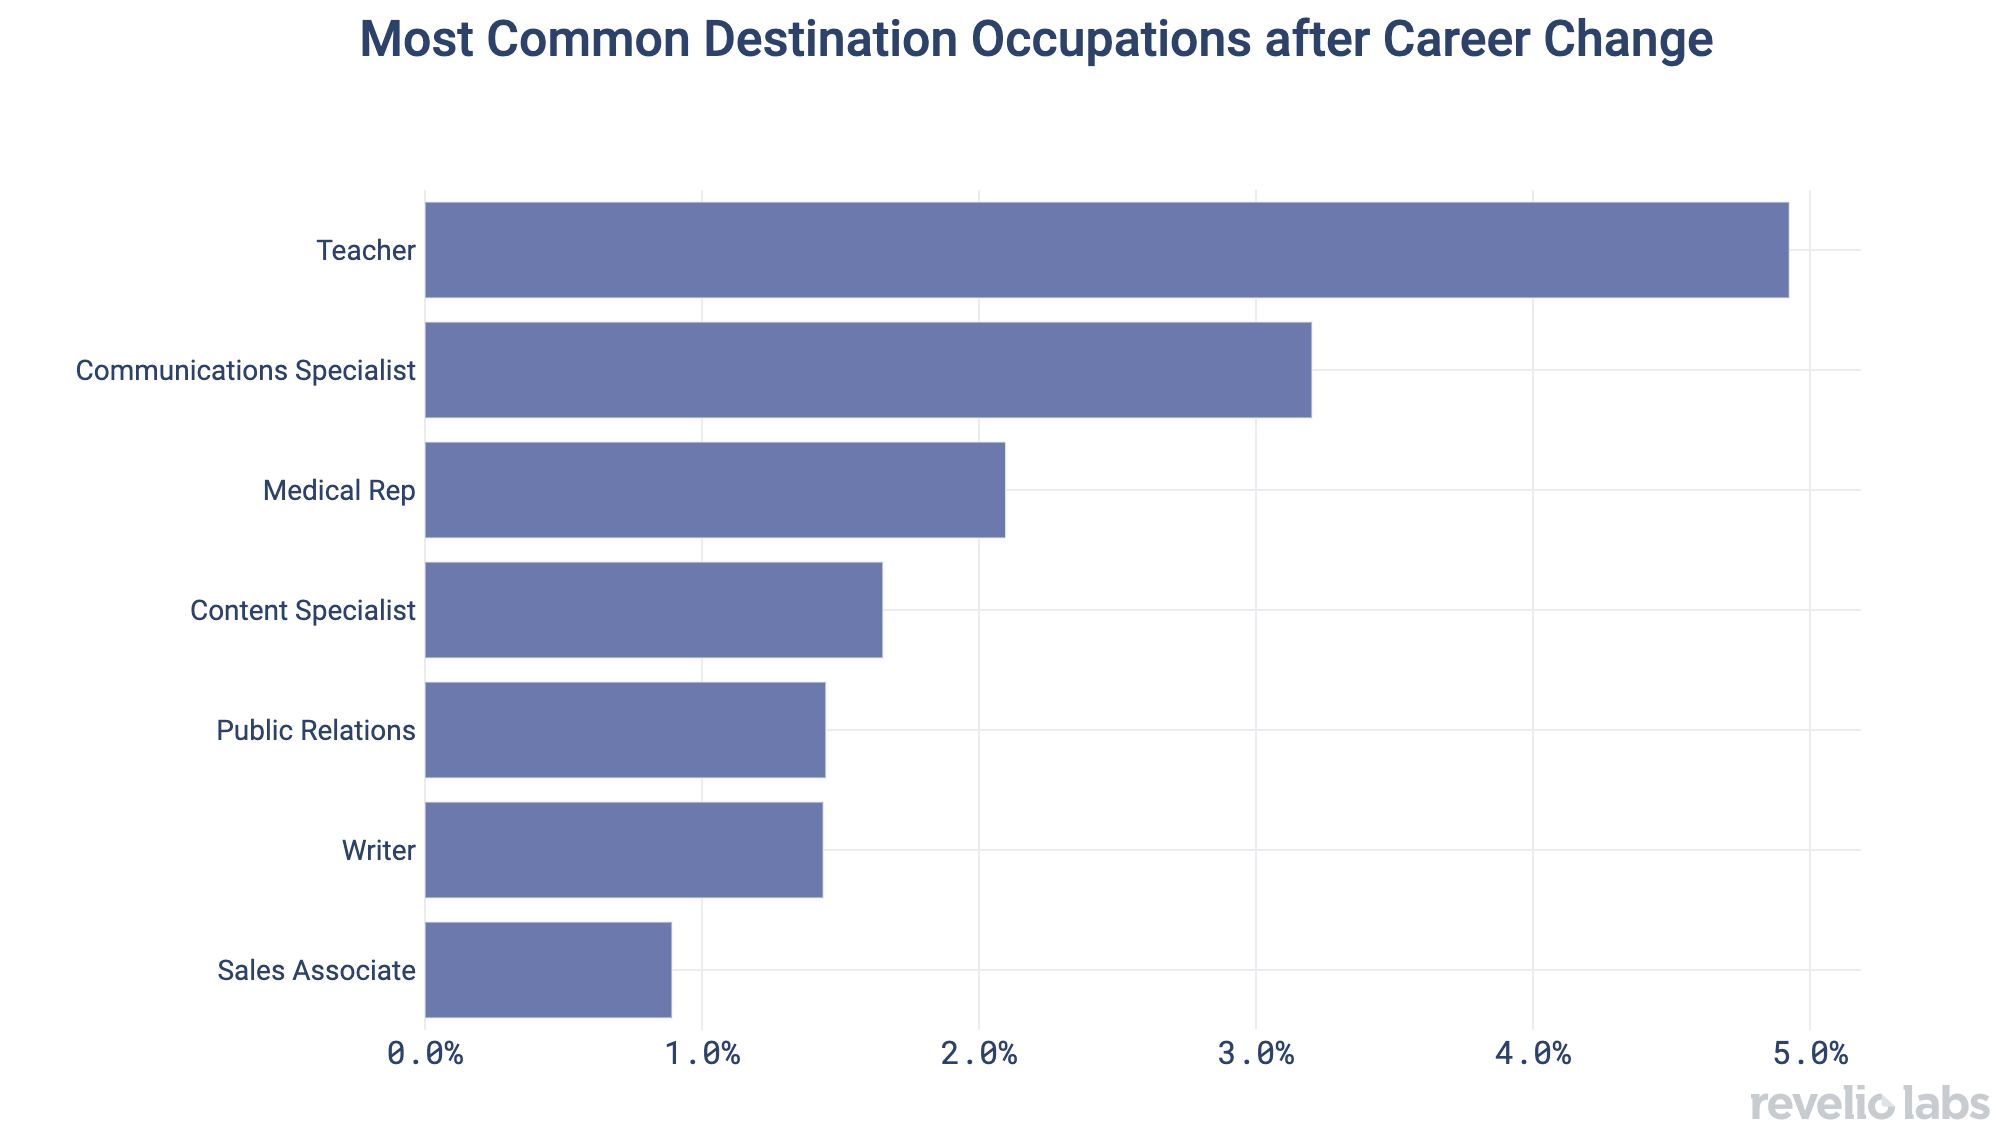 Most Common Destination Occupations after Career Change